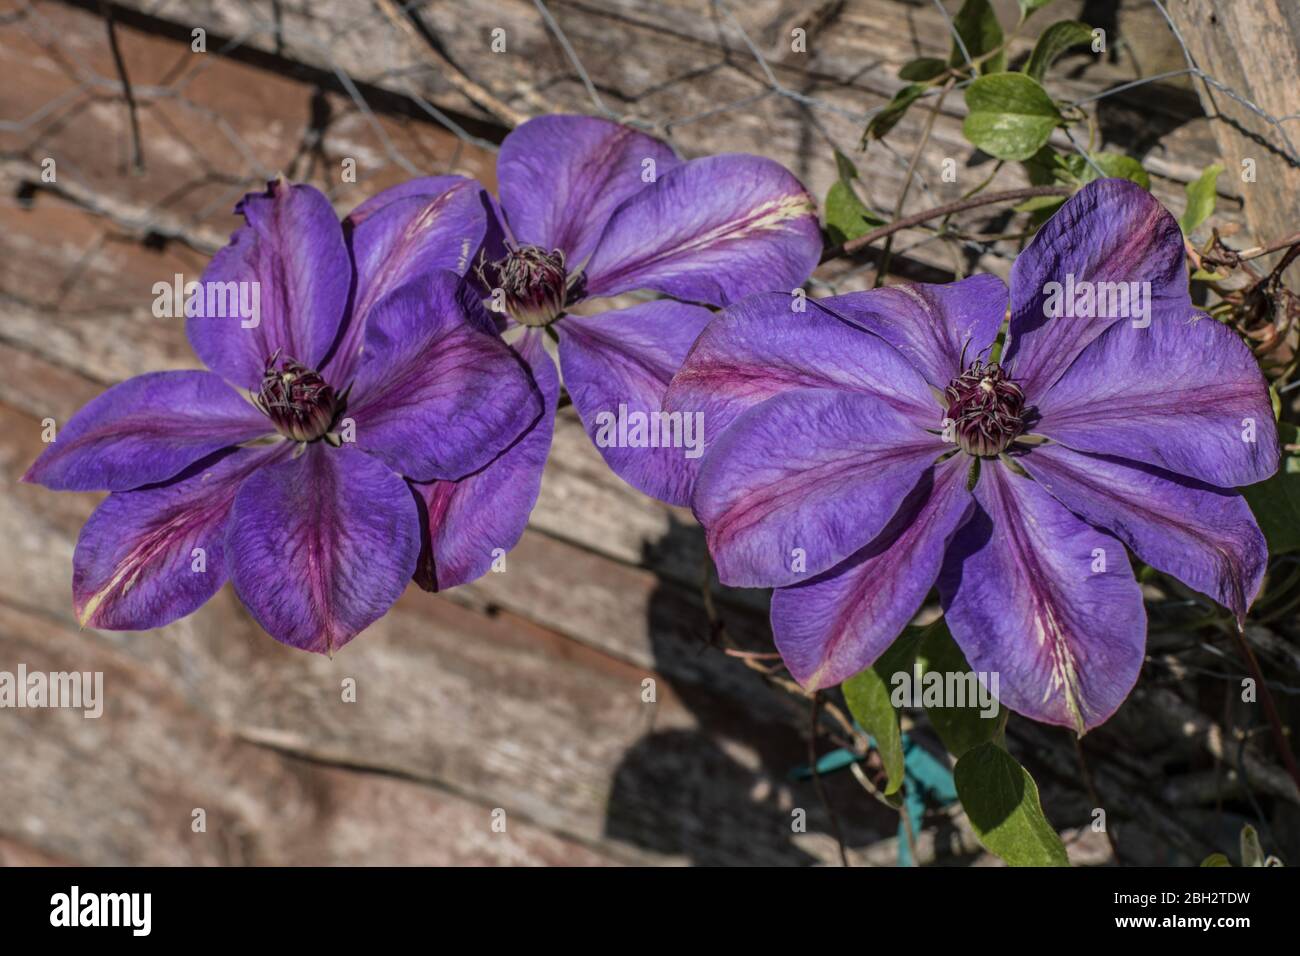 London, England. April, 2020. The beautiful large purple flowers of a clematis   creating vibrate spring colour in an English garden during a sunny sp Stock Photo